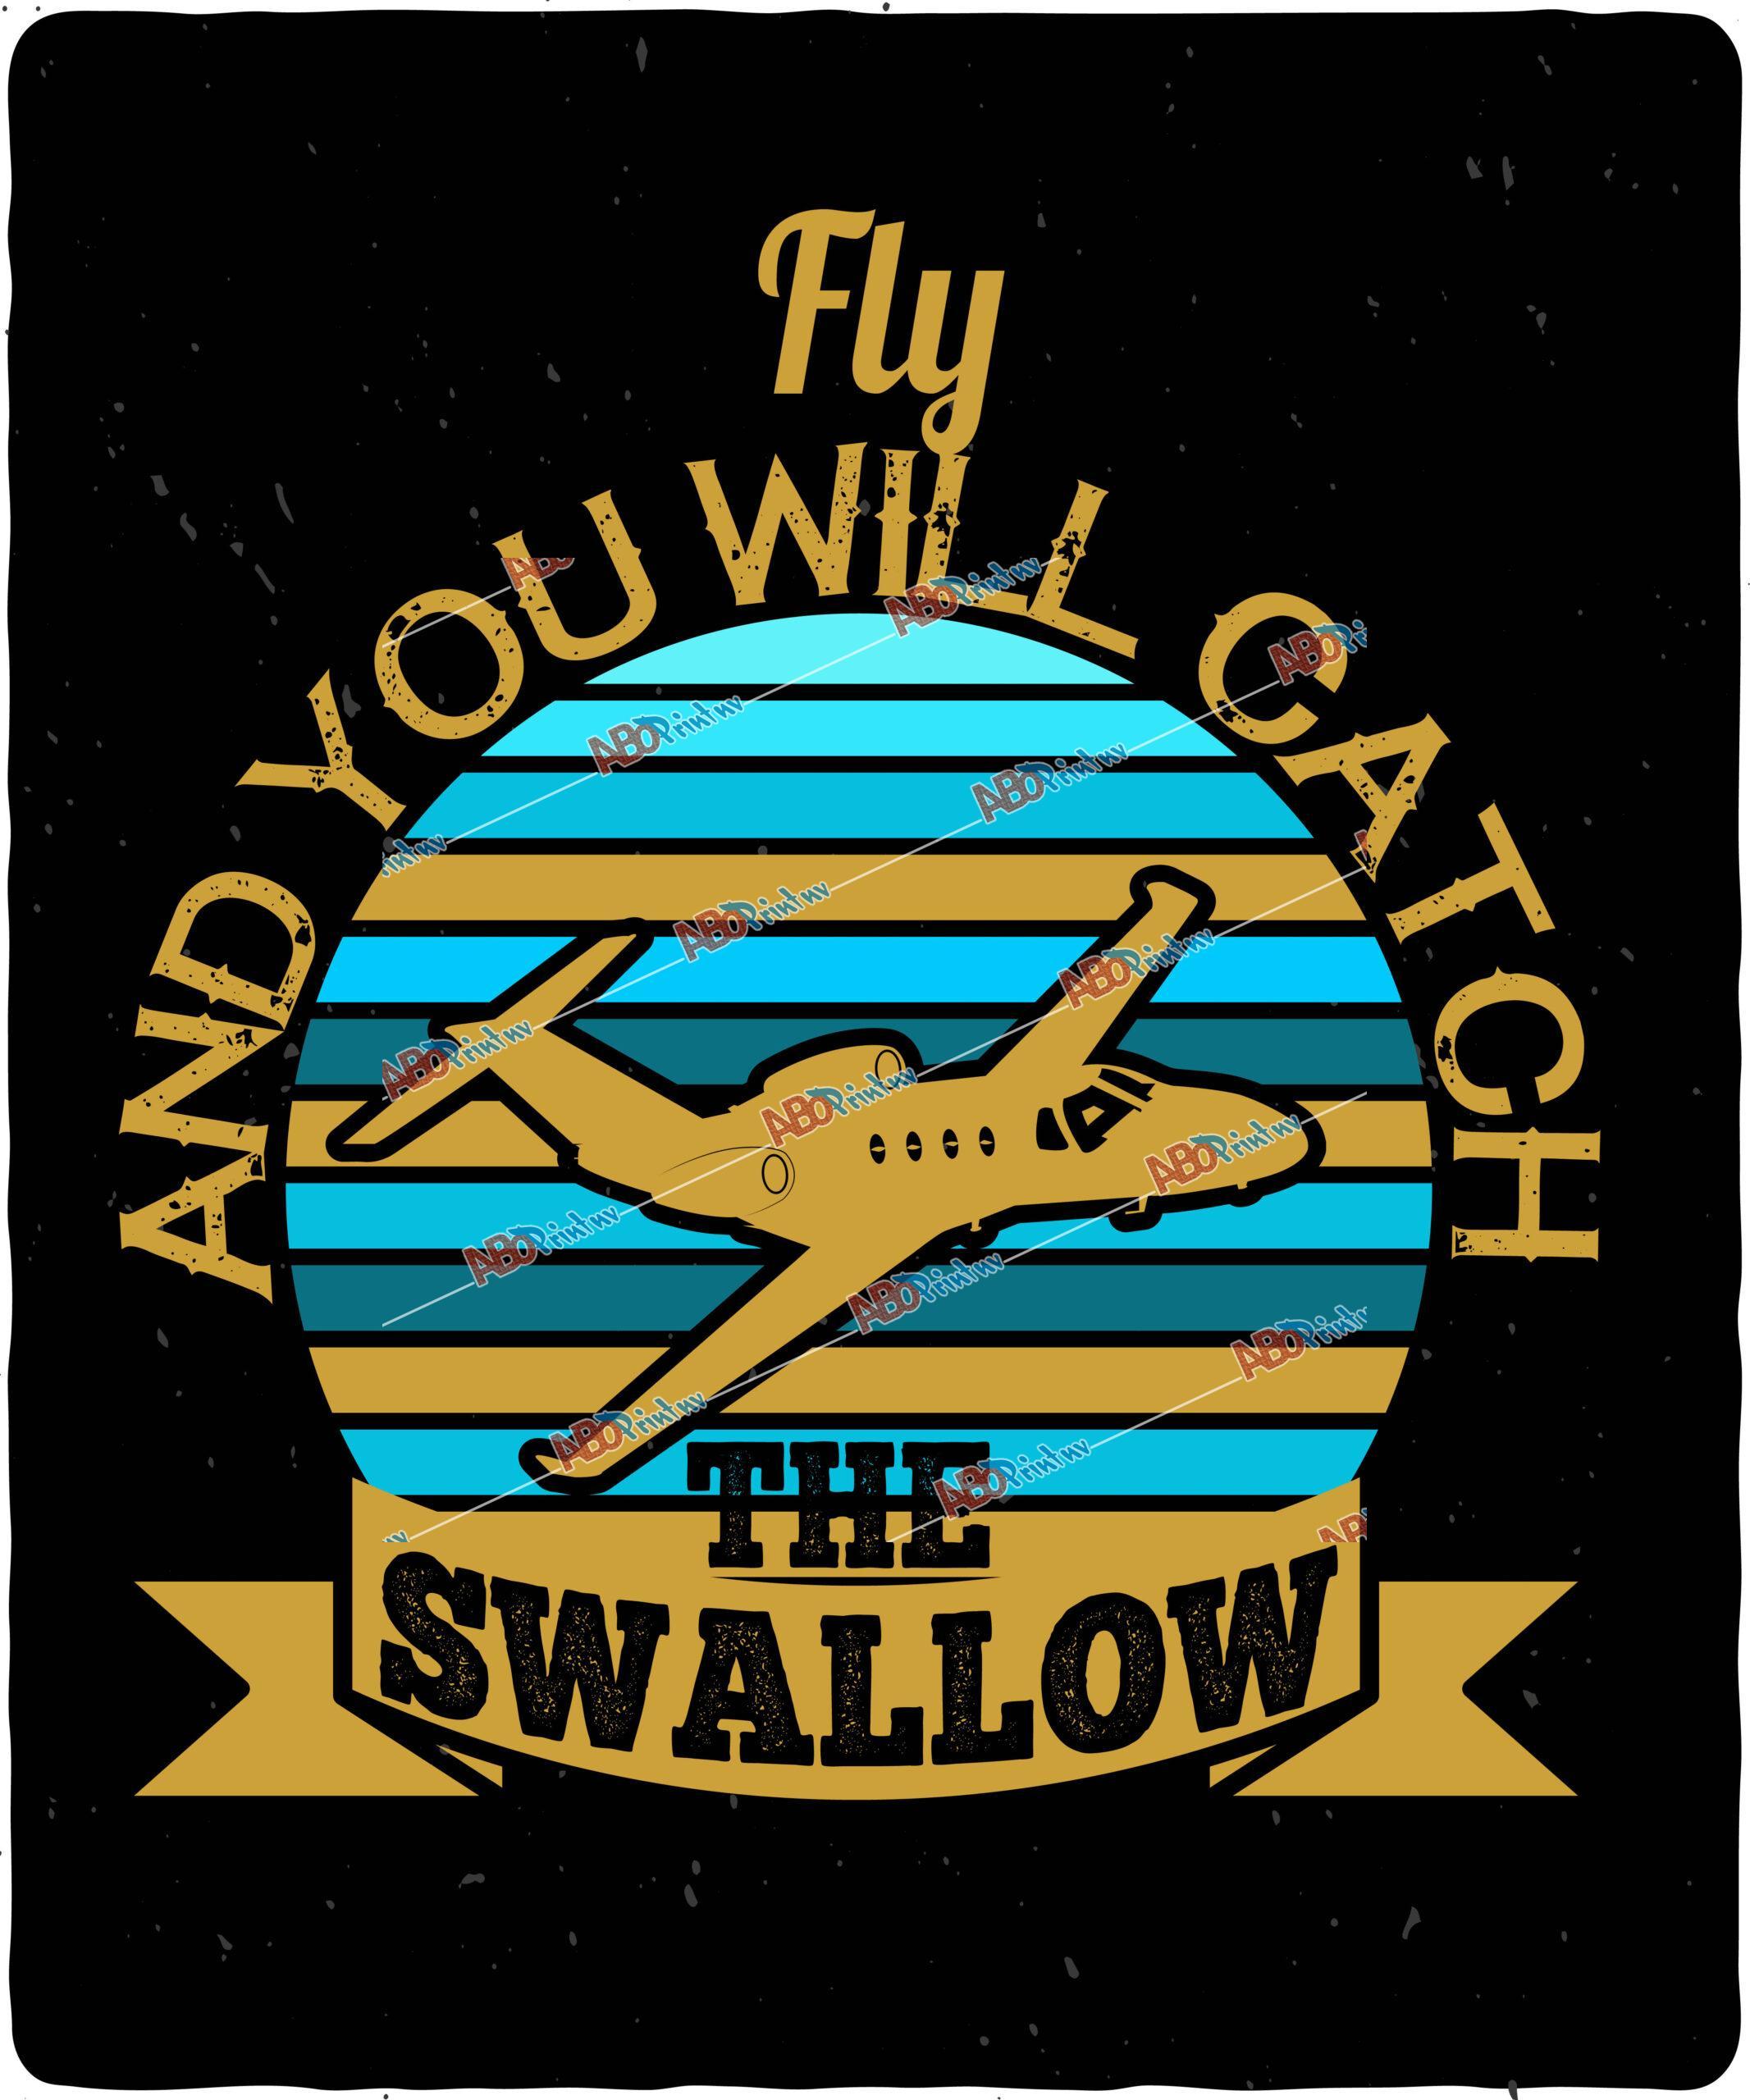 Fly and you will catch the swallow